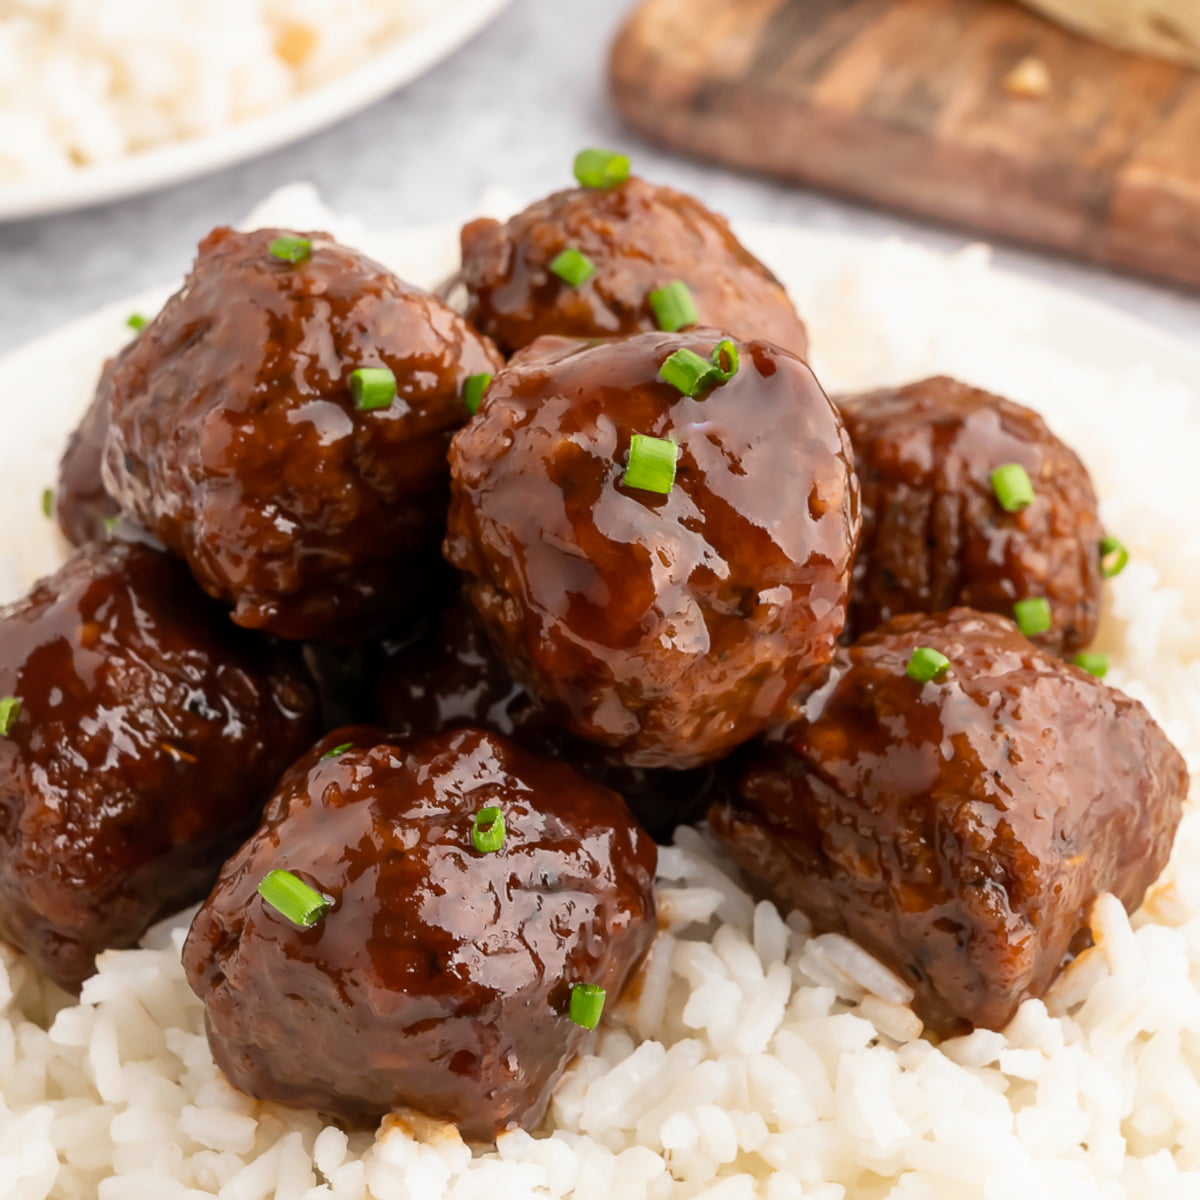 A pile of vegan bbq meatballs on a plate served with rice.